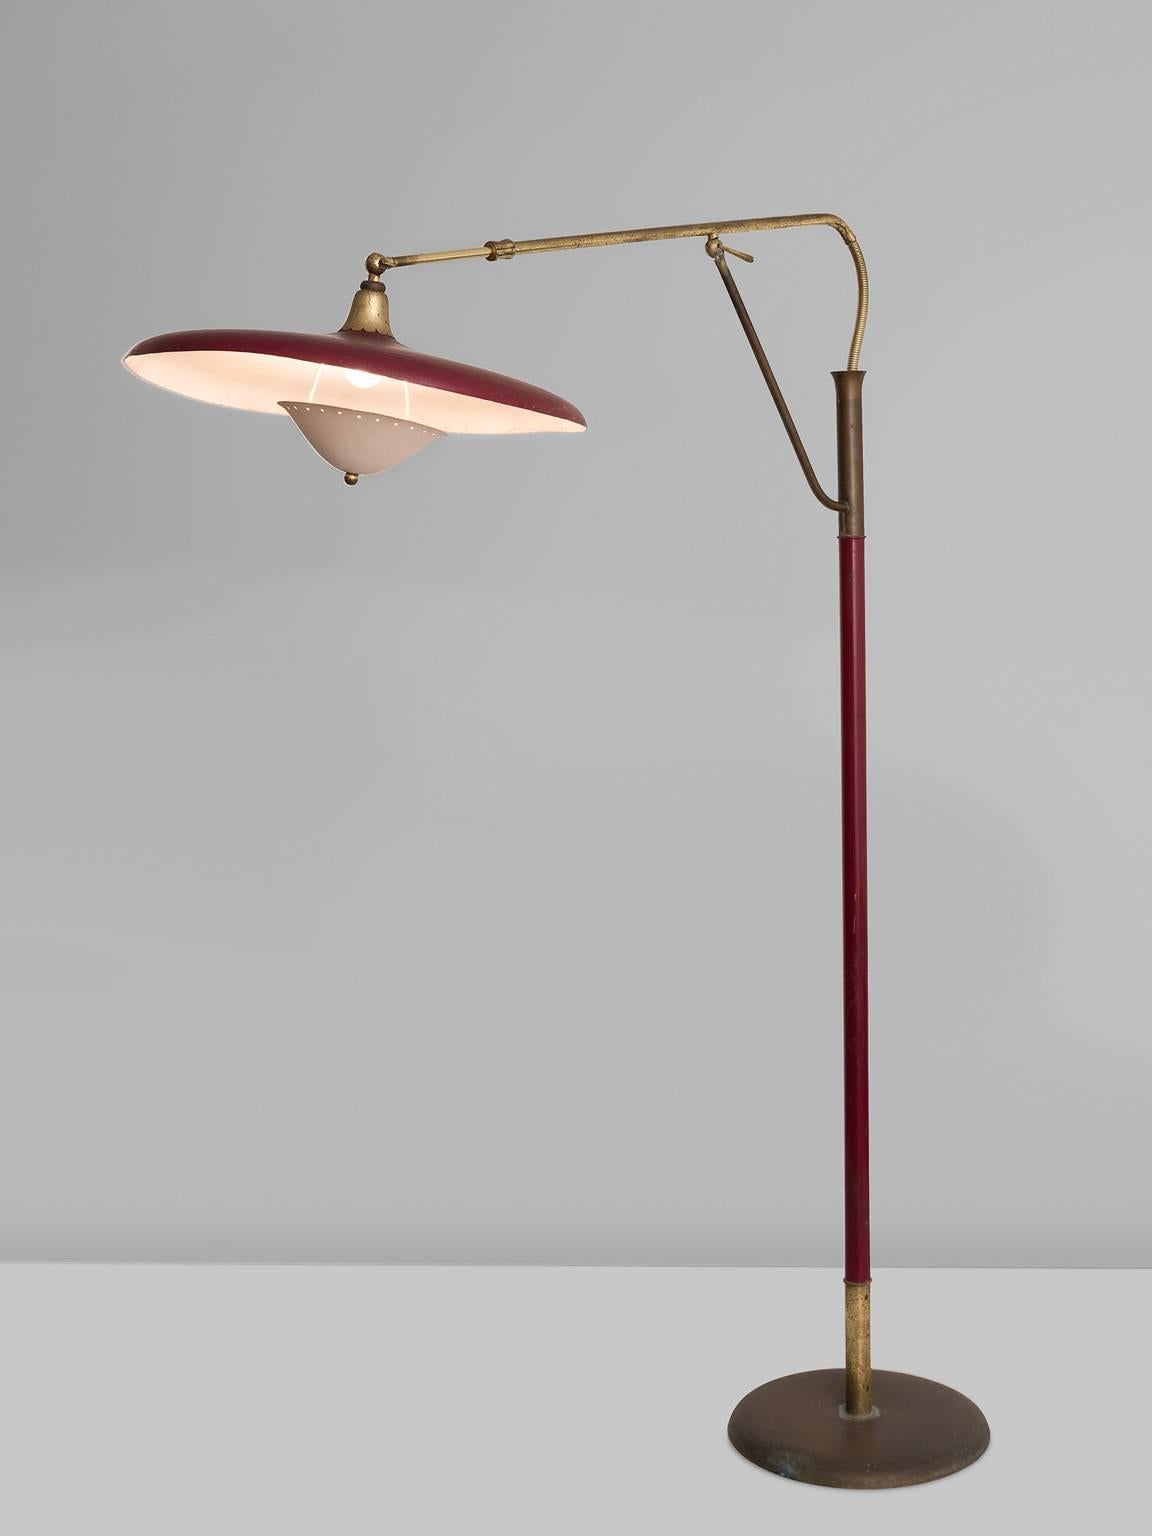 Floor lamp by Arredoluce, cast iron, varnished tubular steel, brass, lacquered aluminium, Italy, 1950s. 

This red and brass floor lamp features a circular base and a slender, long shaft. From the shaft a bended brass handle that holds the round